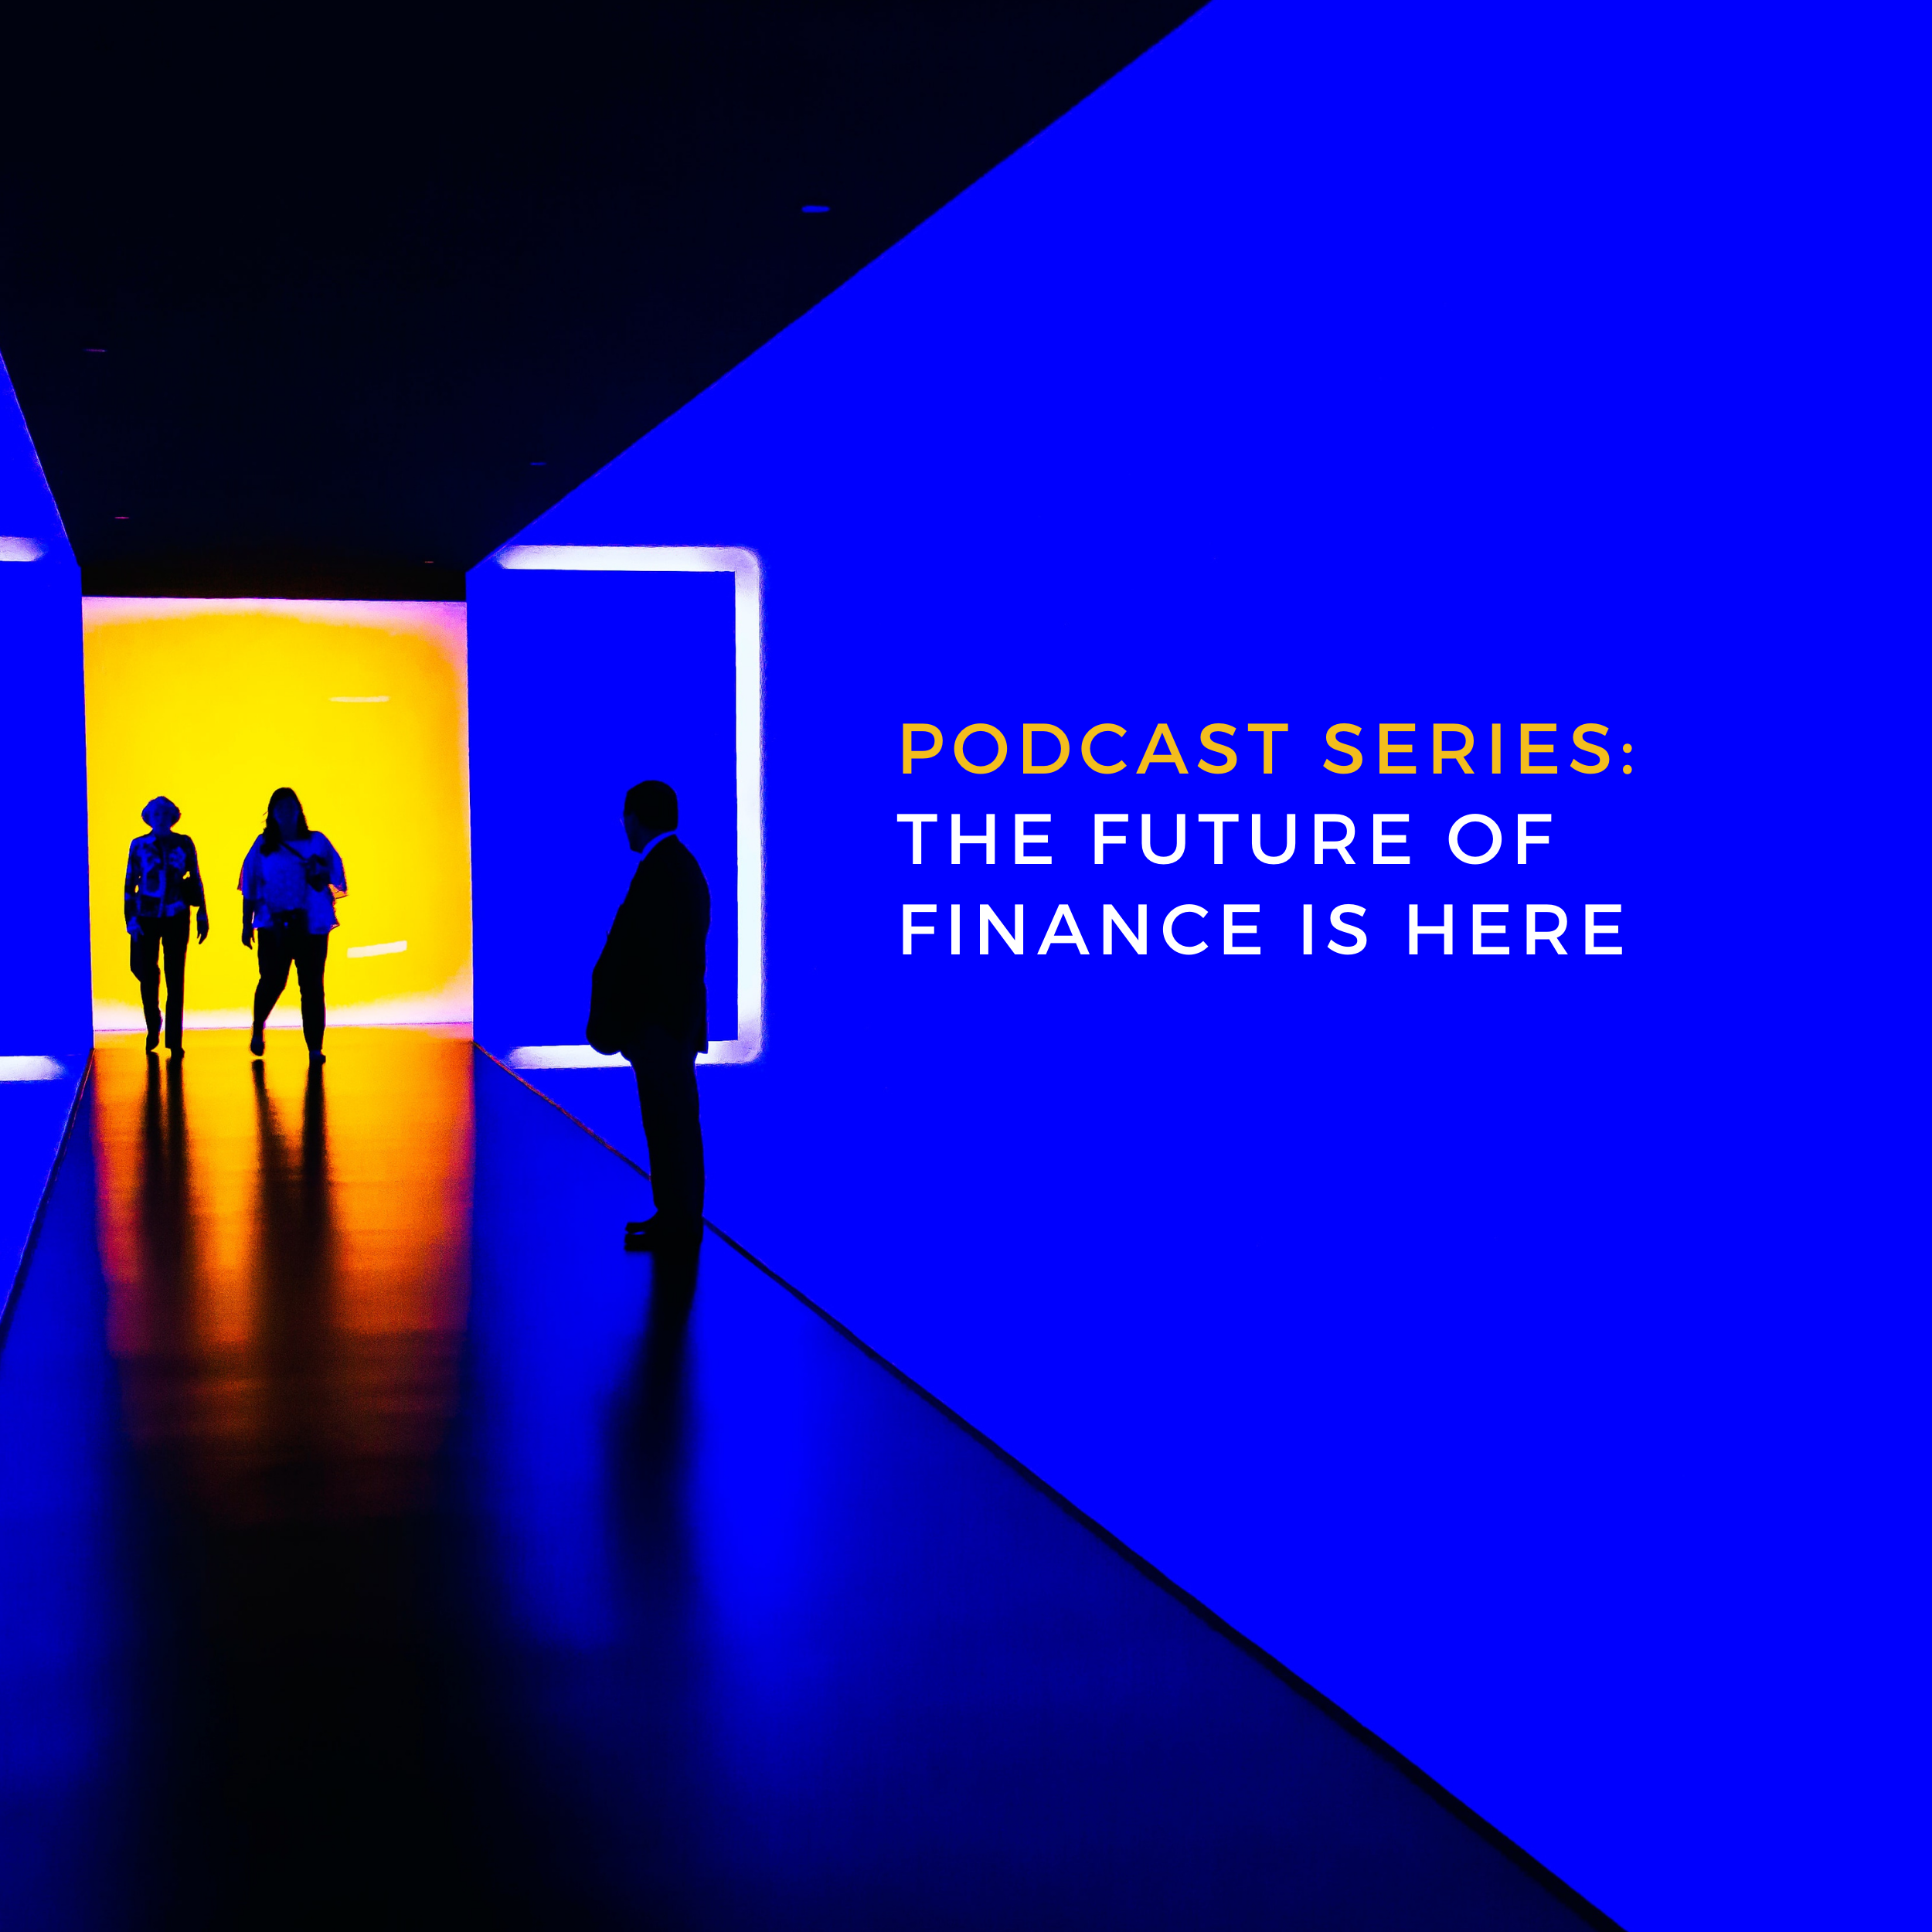 Episode 1.2 - Ross Greenwood discusses how the finance industry is 'playing a long game'